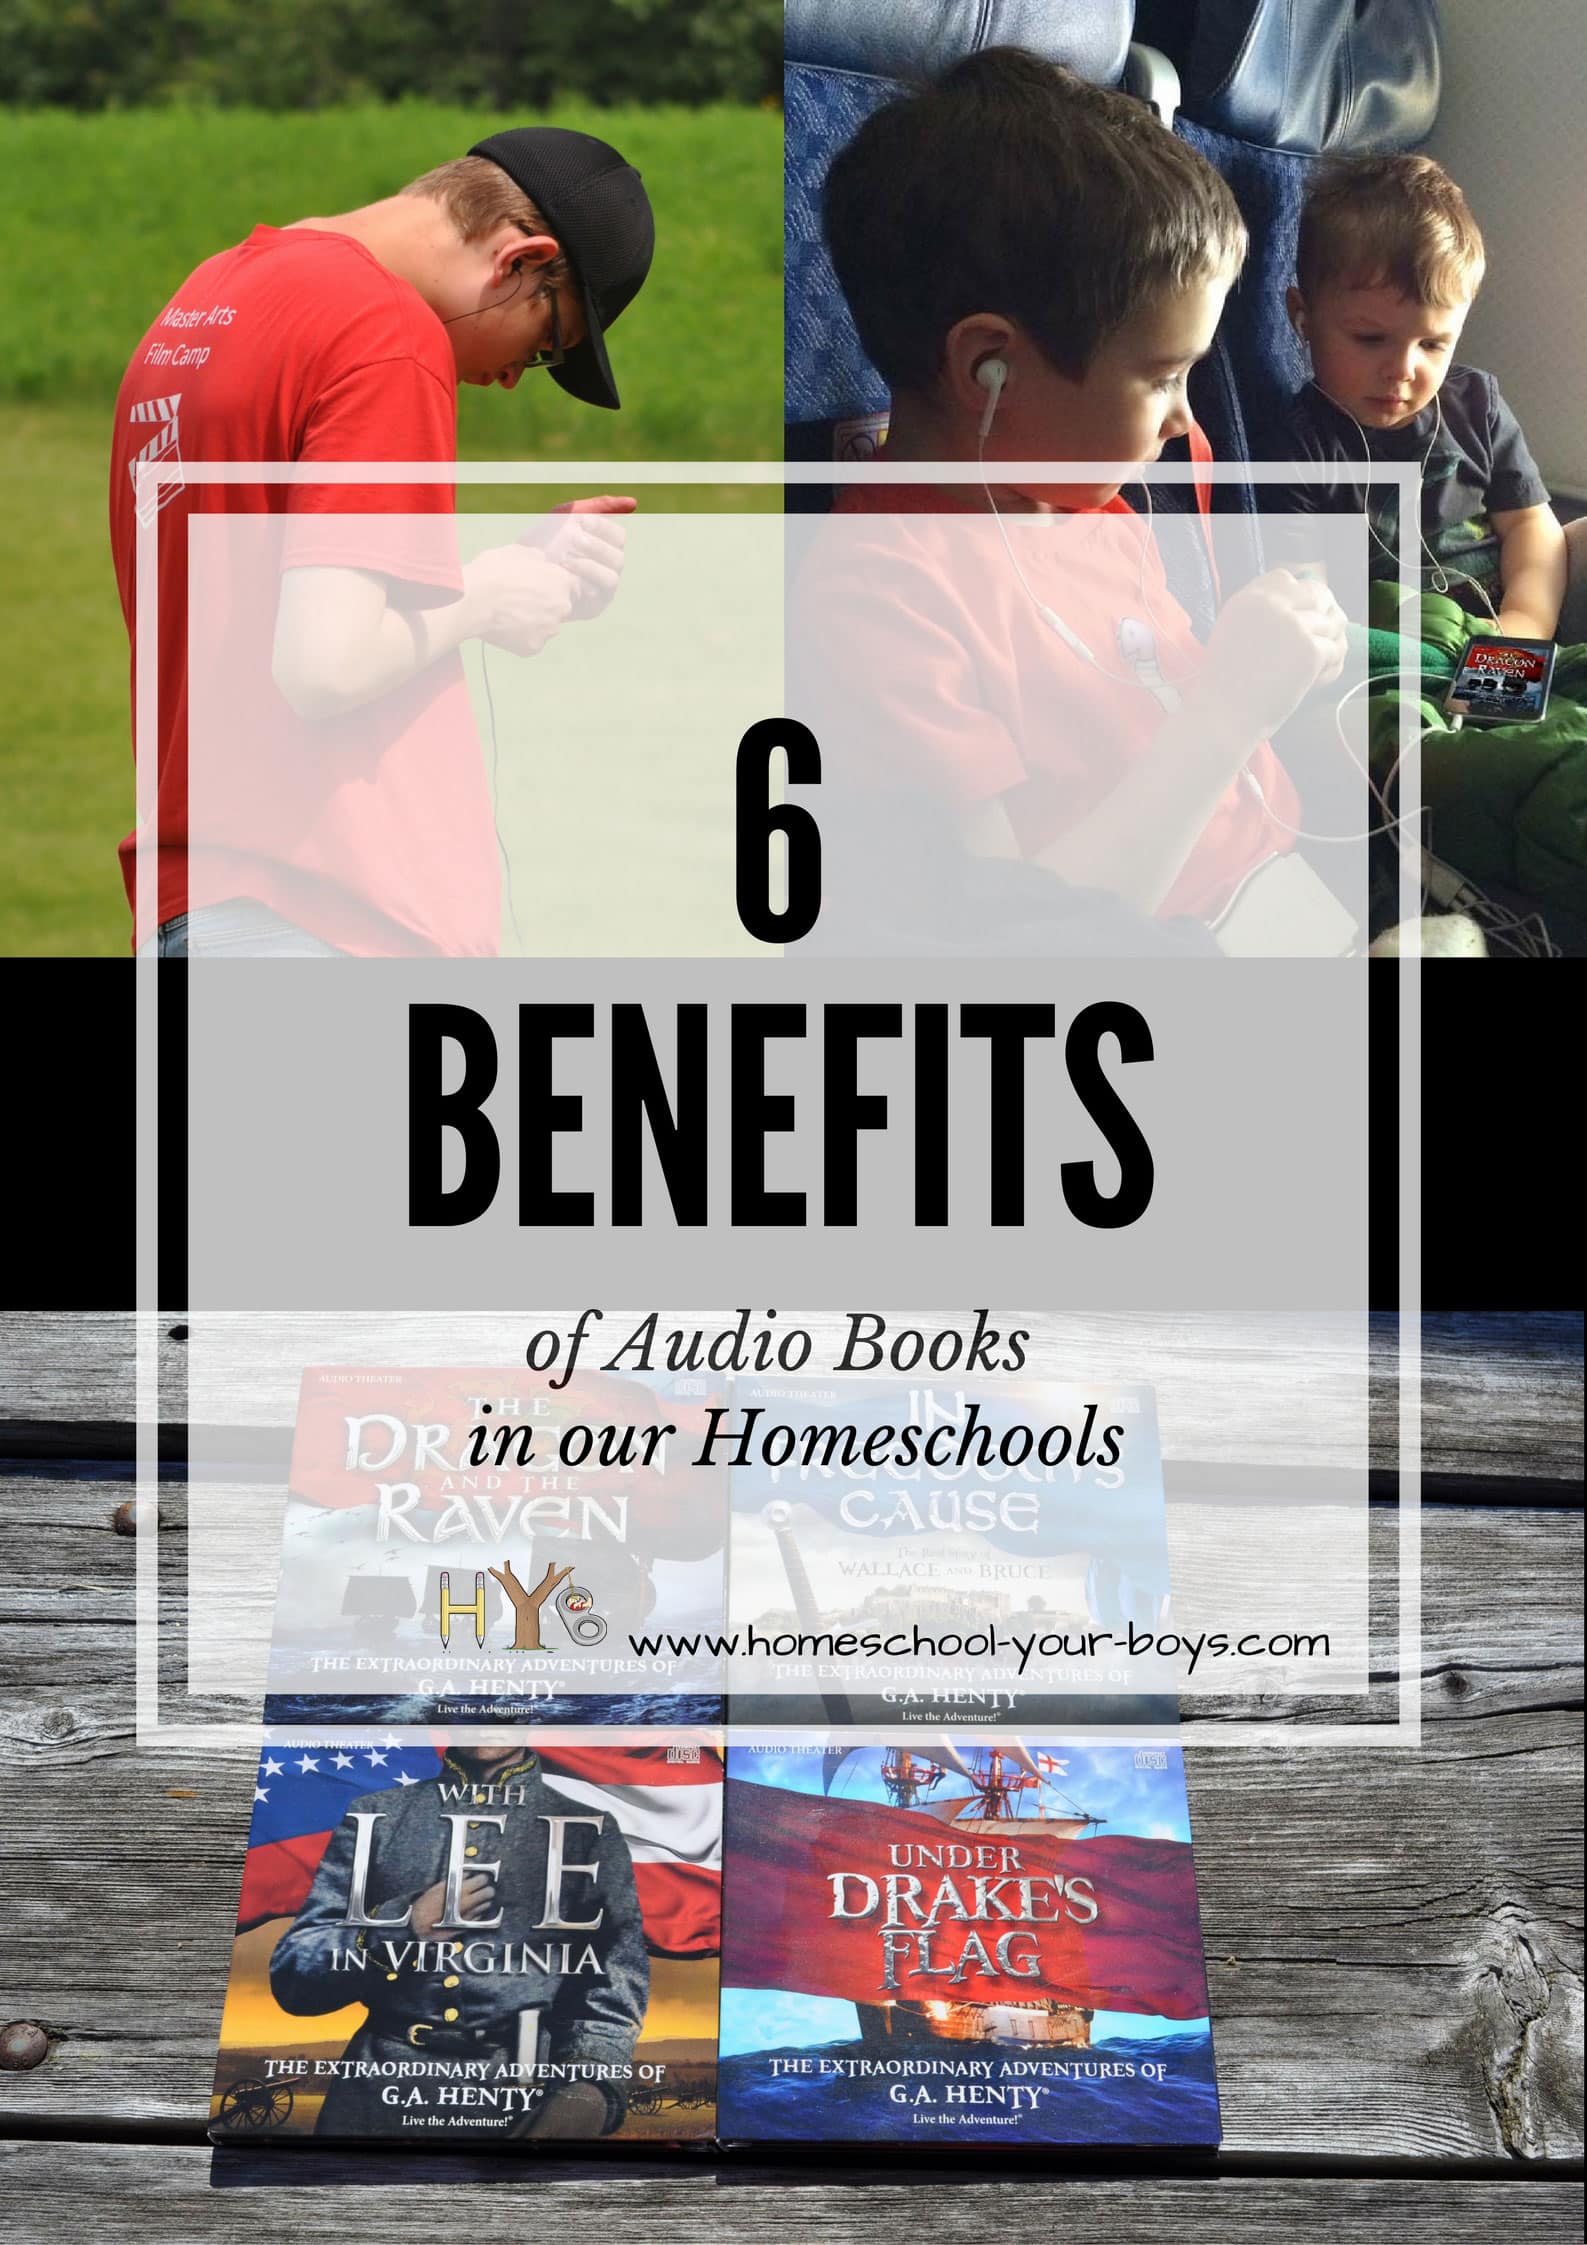 6 Benefits of Audio Books in our Homeschools